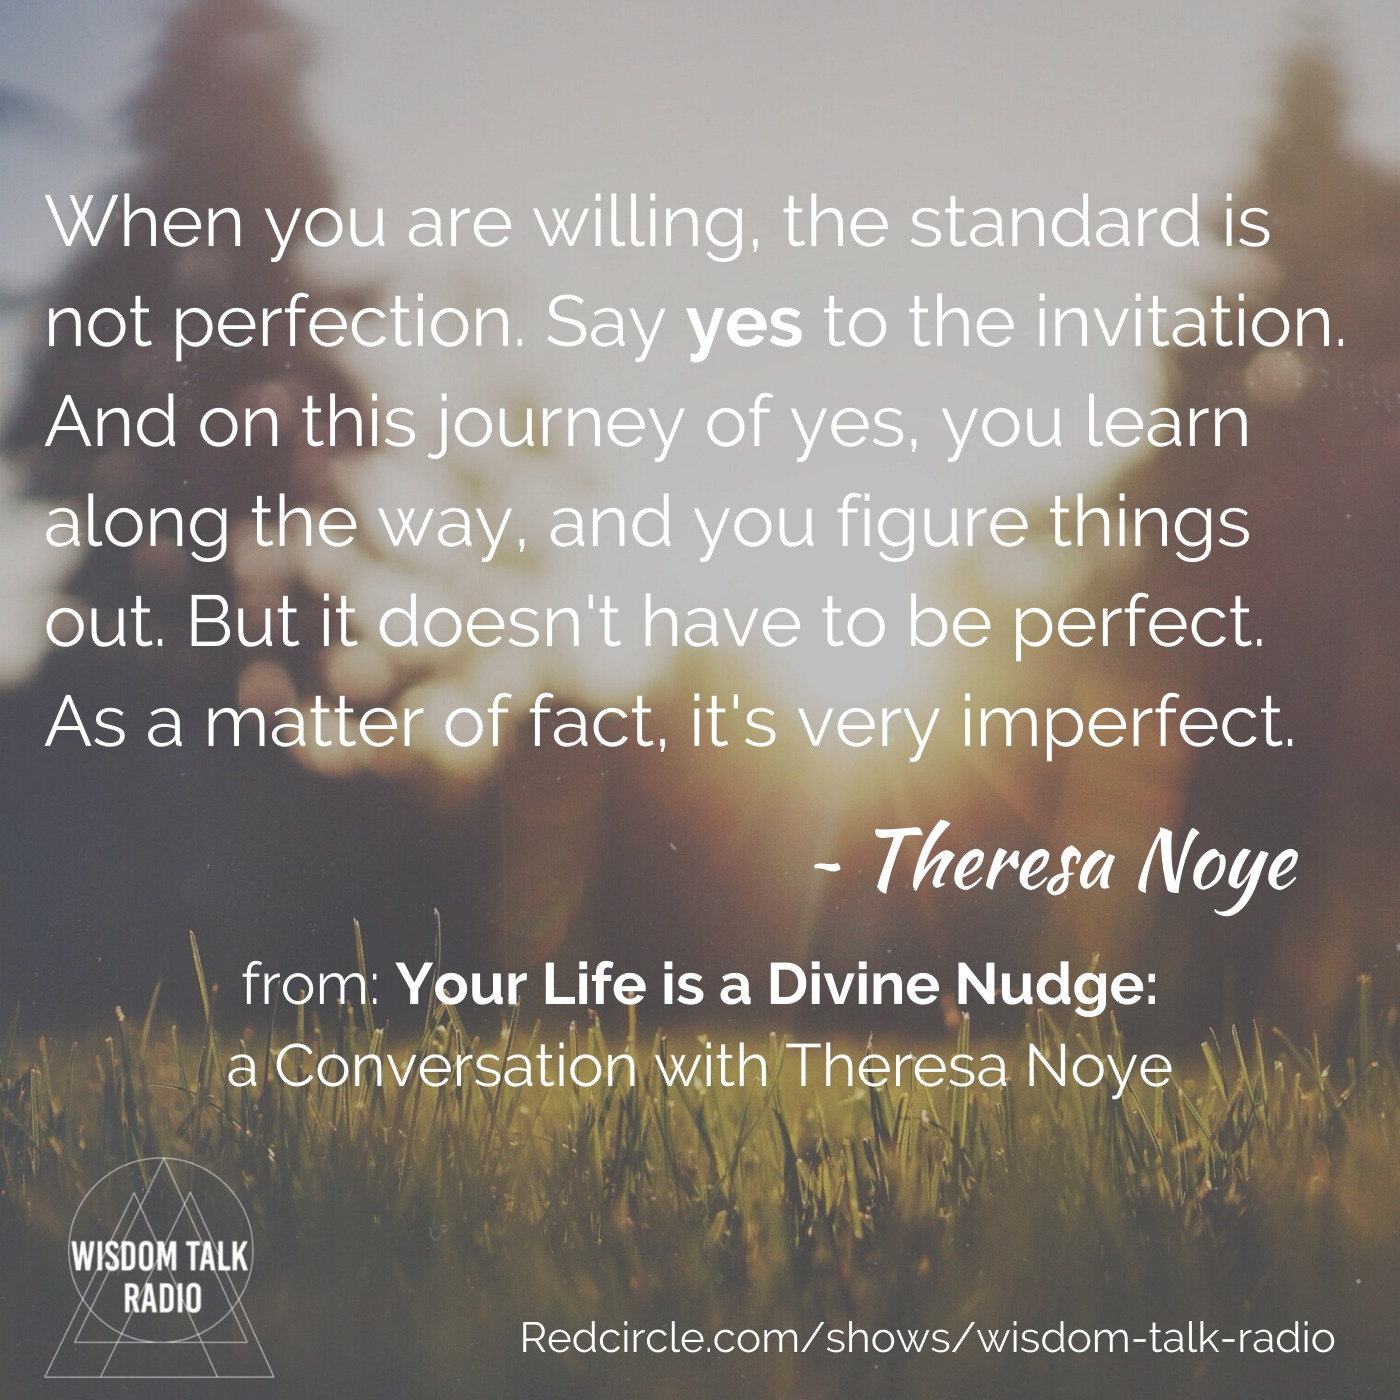 Your Life is a Divine Nudge, a Conversation with Theresa Noye